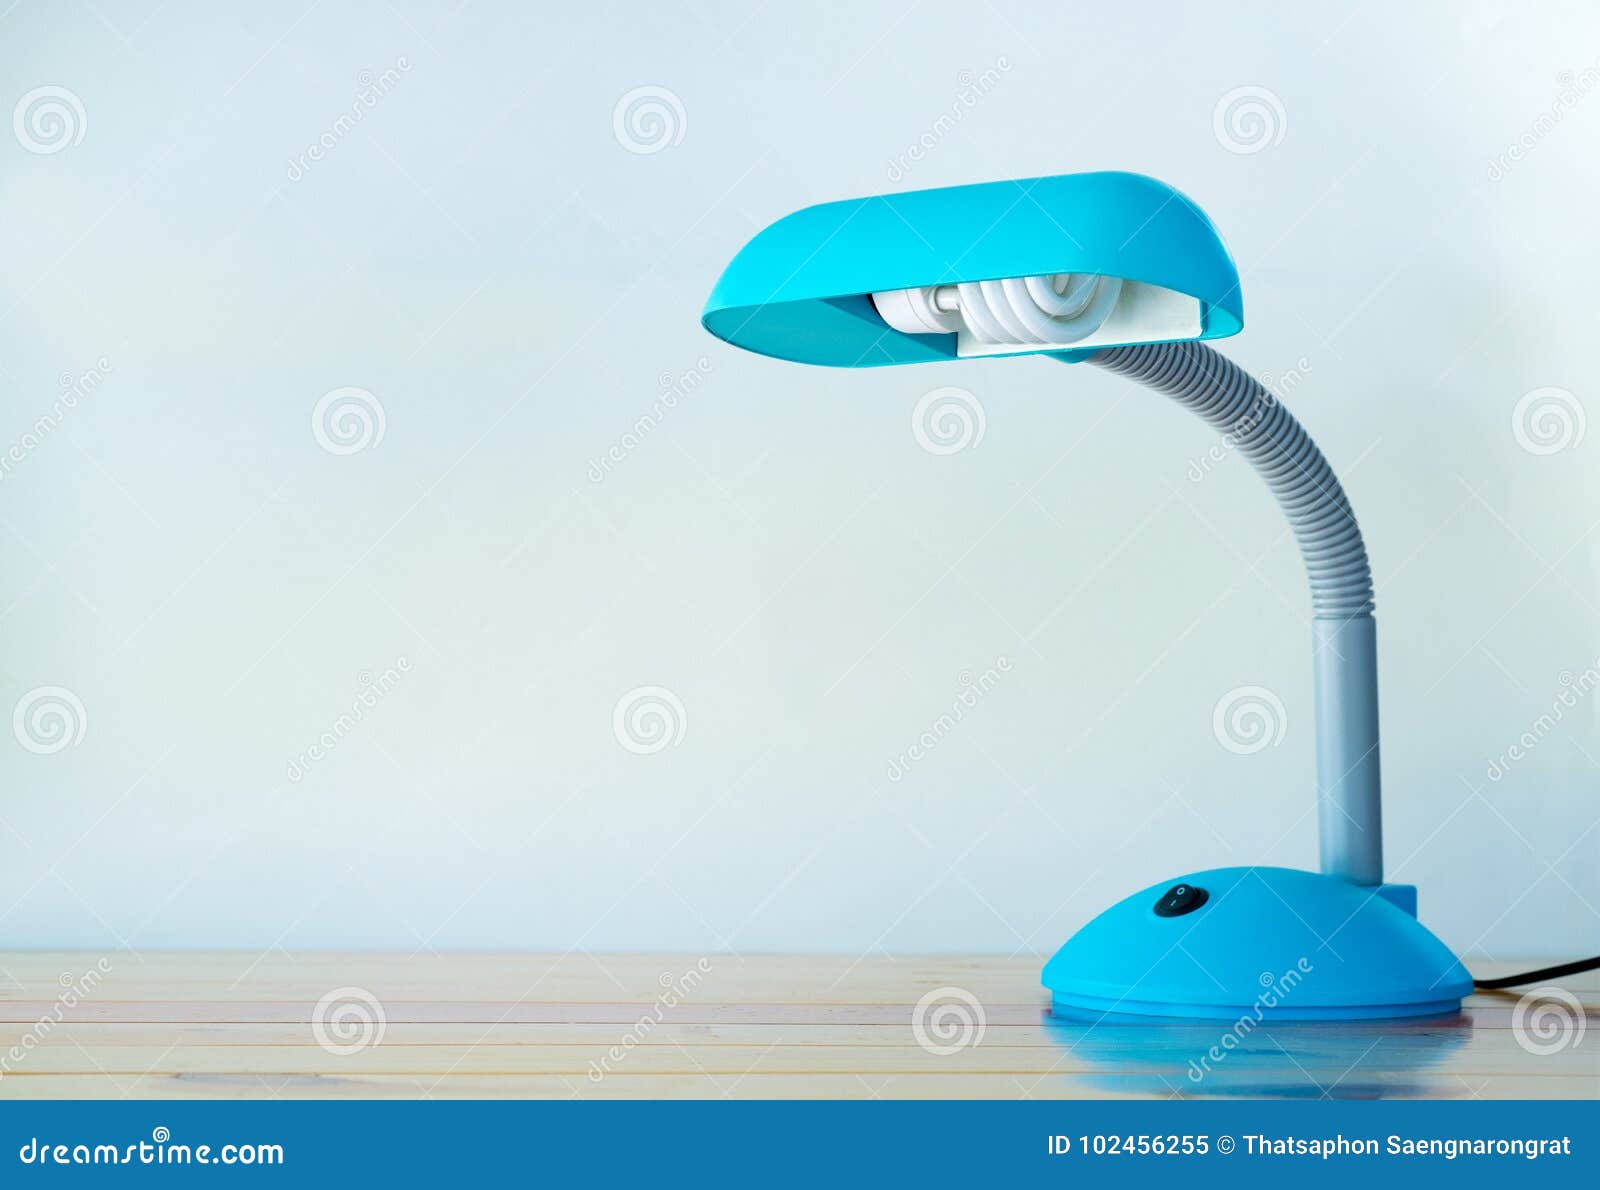 Blue Desk Lamp On Wooden Table With Copy Space Stock Image